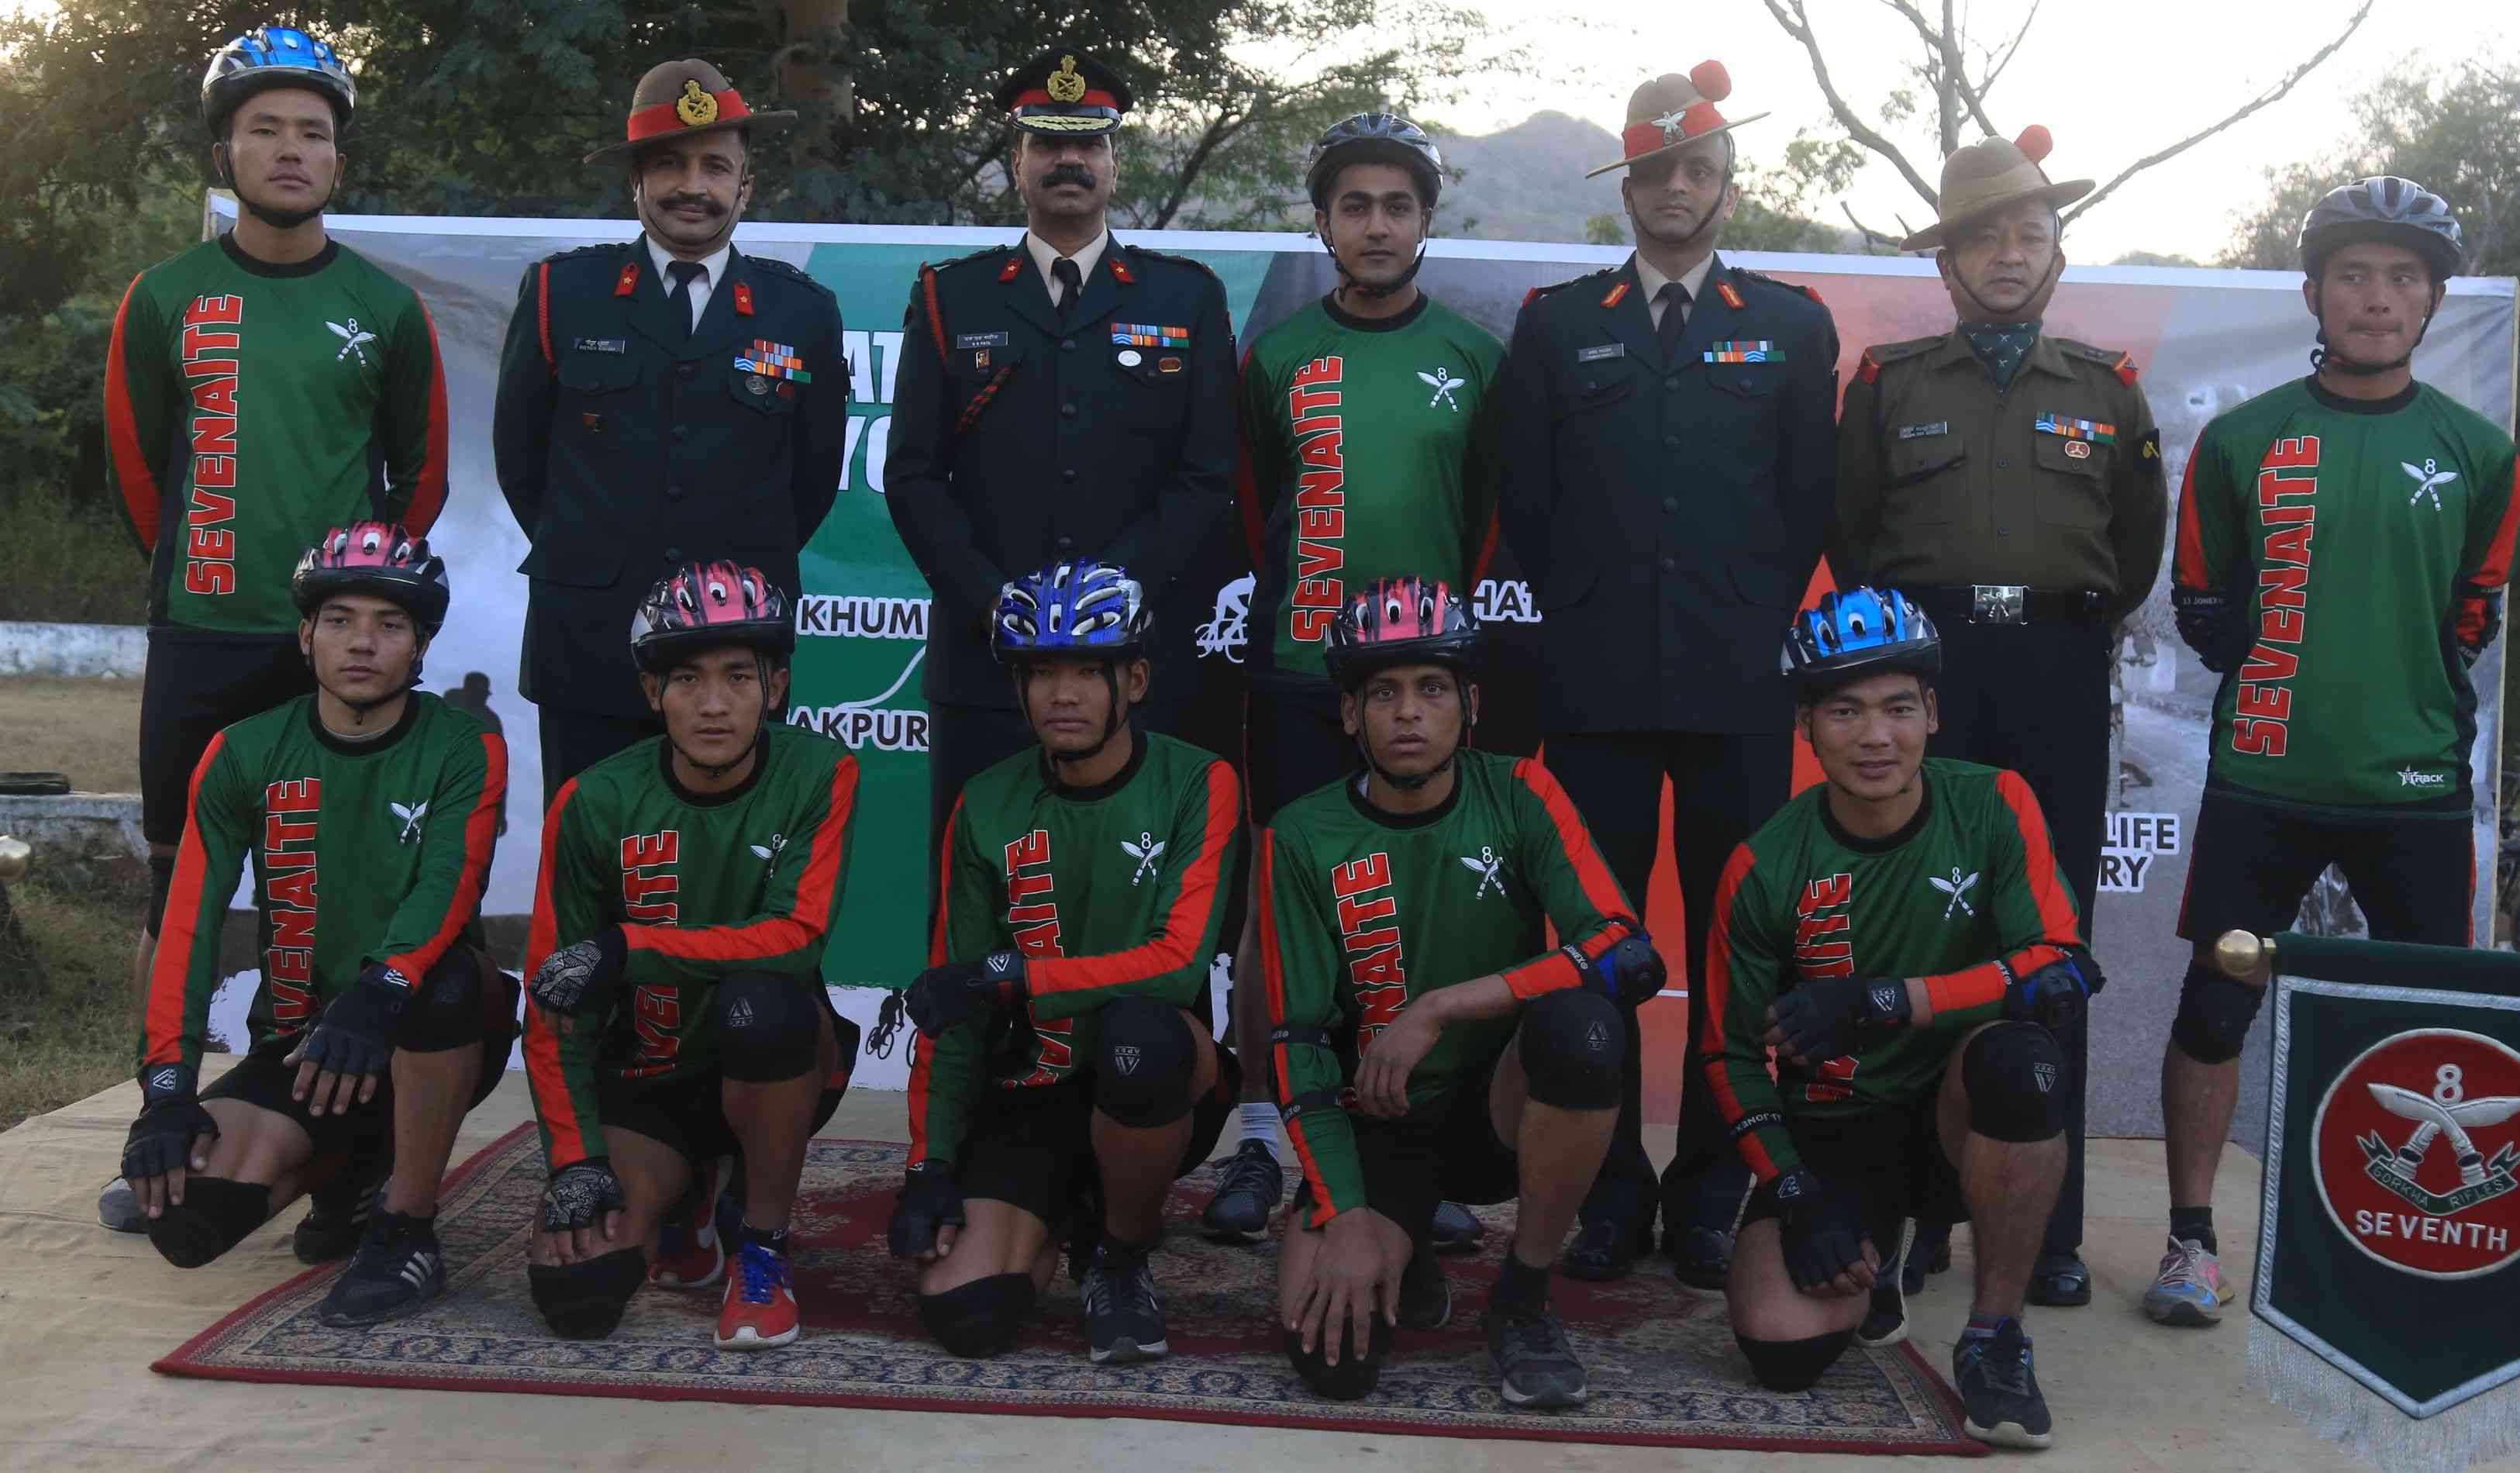 Gorkha Rifles team in Udaipur-Cycling with a mission